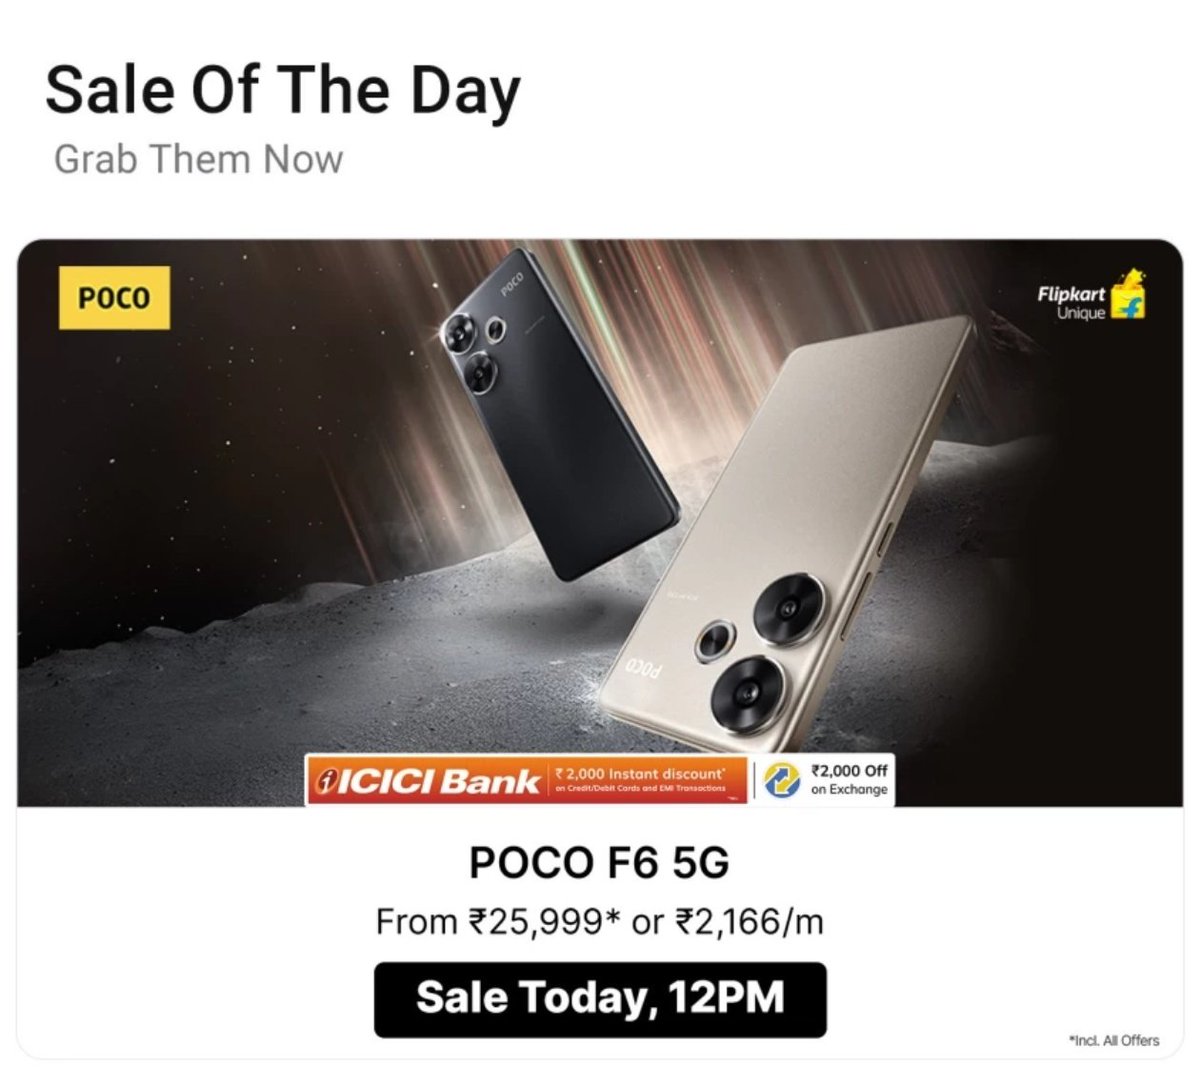 POCO F6 deal of the Day
You can get this only 24,999*
MRP Price 29,999
Card discount 2k off
1k off supercoins
2k off exchange discount
So total discount you get 5k

#POCOF6 #GodModeOn